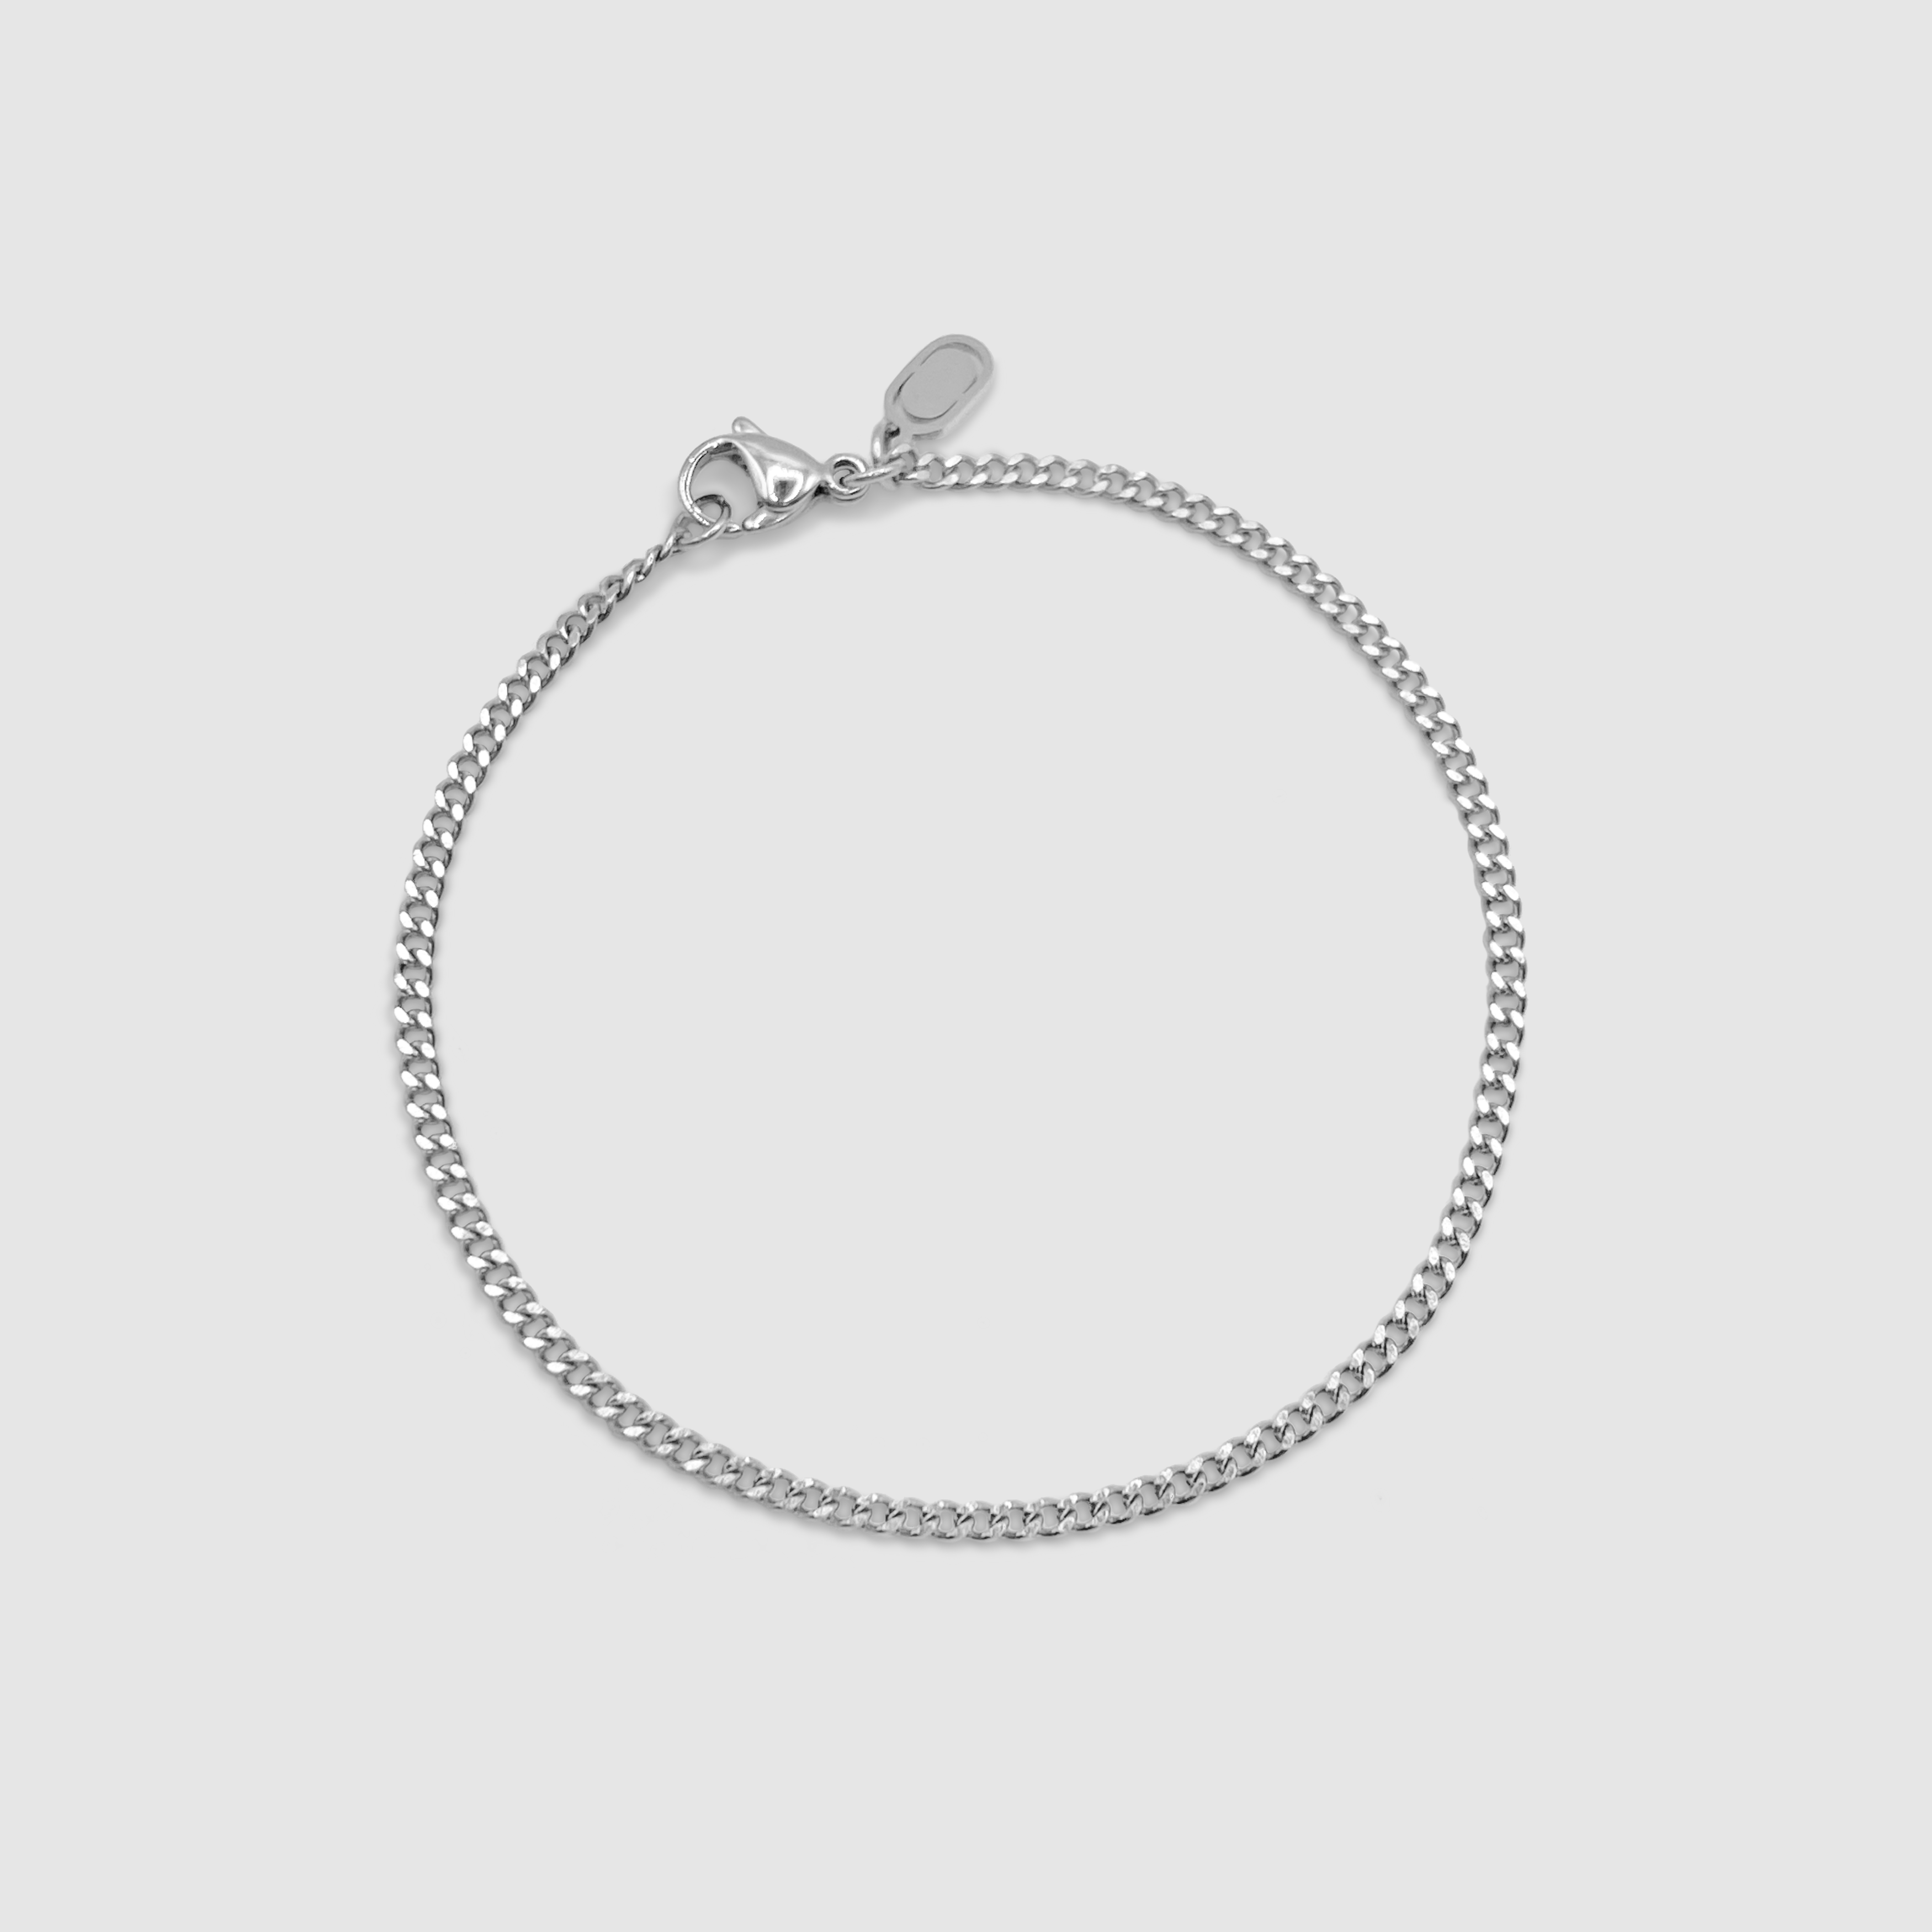 Connell armband (silver) 2mm